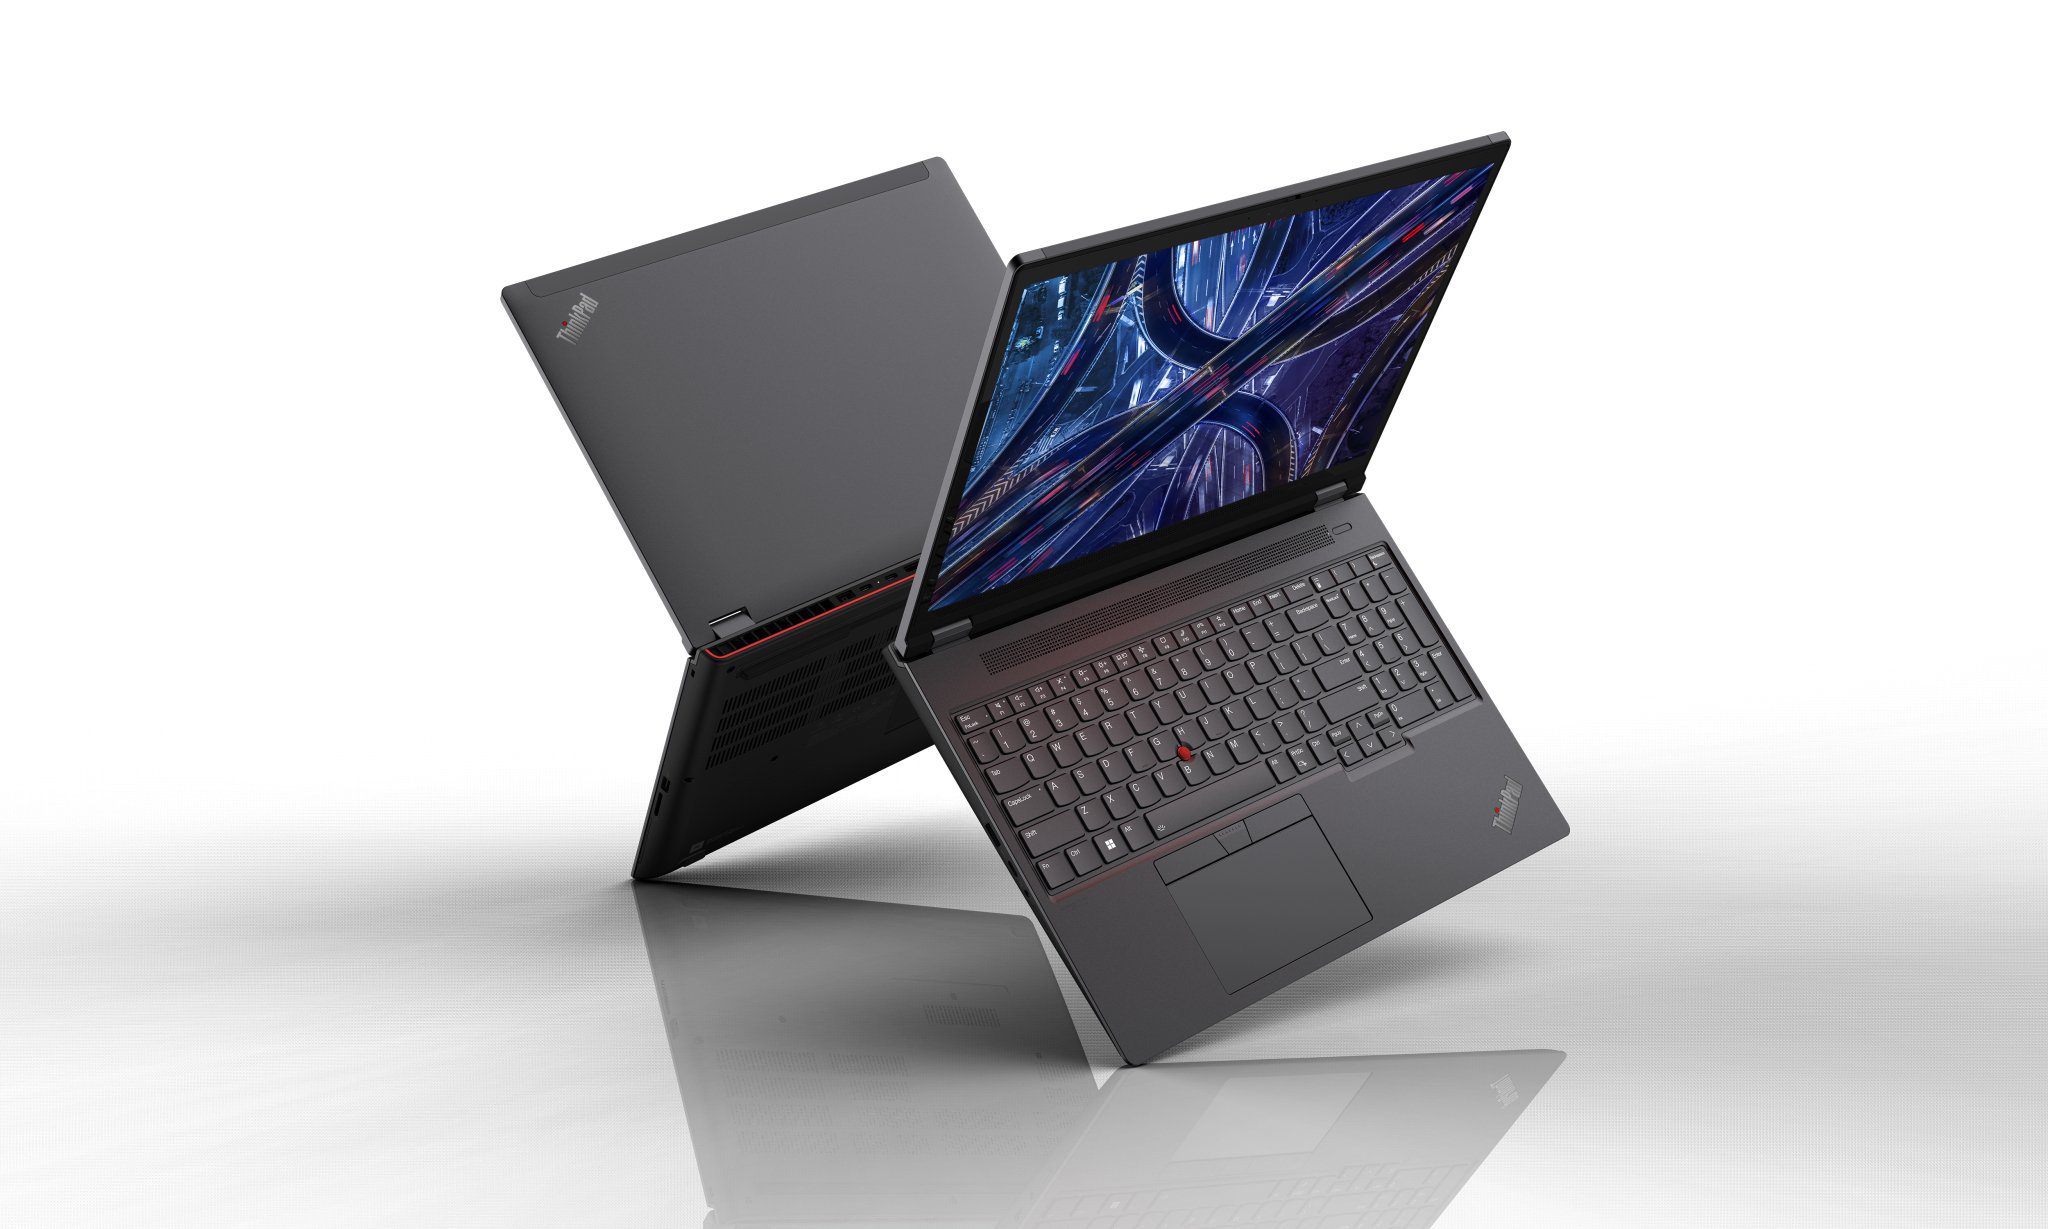 Lenovo has launched two new ThinkStation and ThinkPad workstations